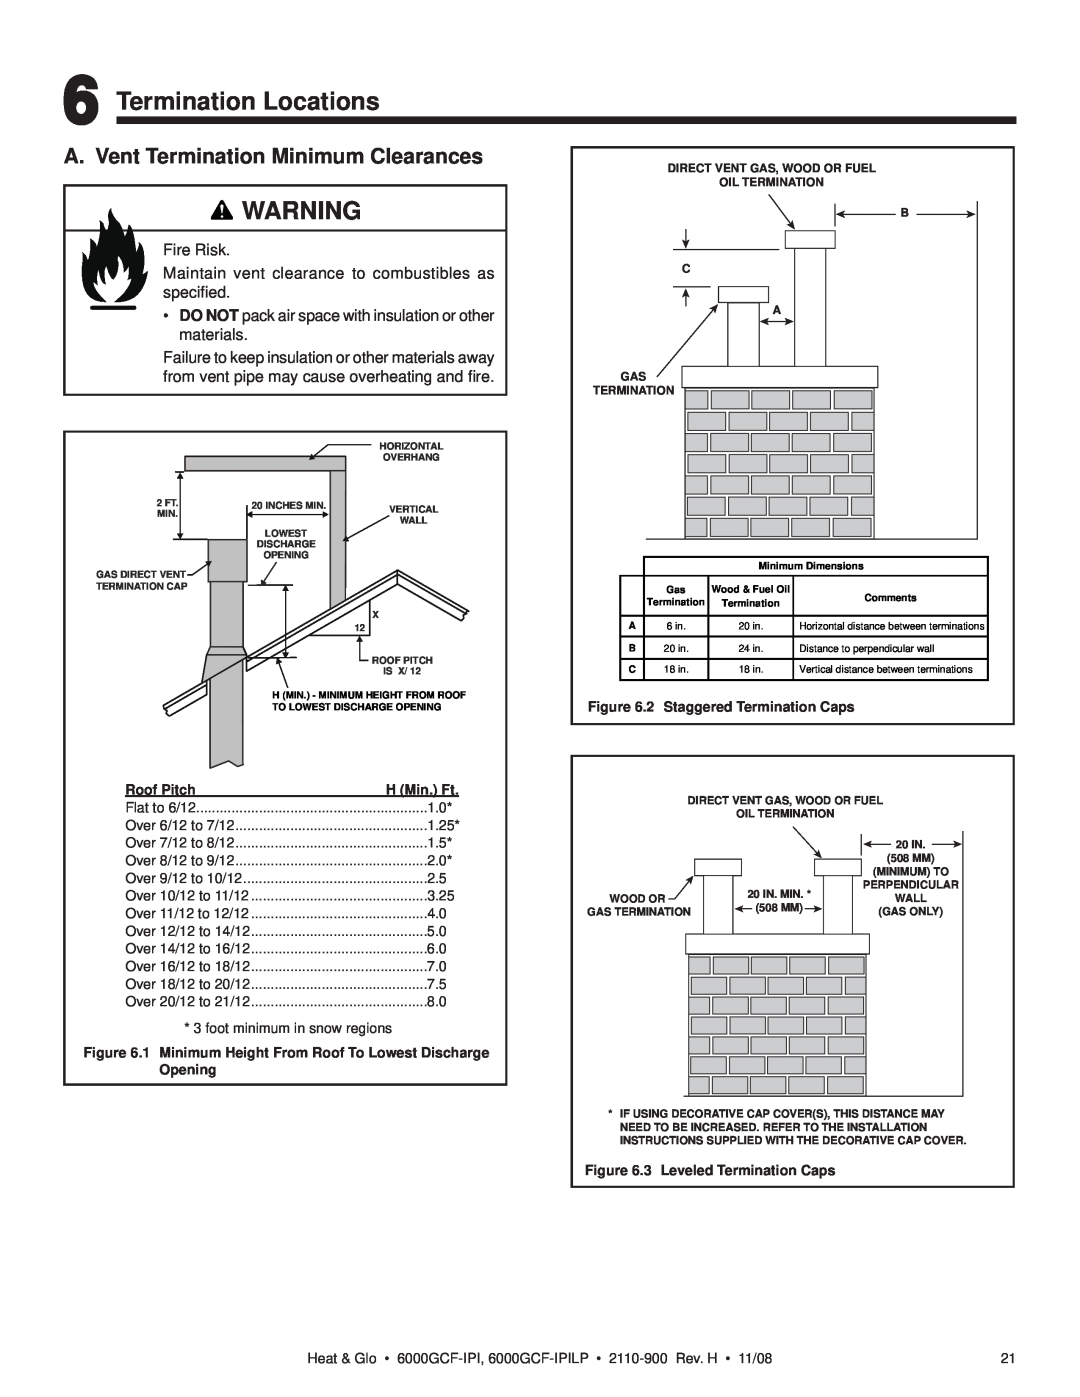 Hearth and Home Technologies 6000GCF-IPI Termination Locations, A. Vent Termination Minimum Clearances, Roof Pitch 